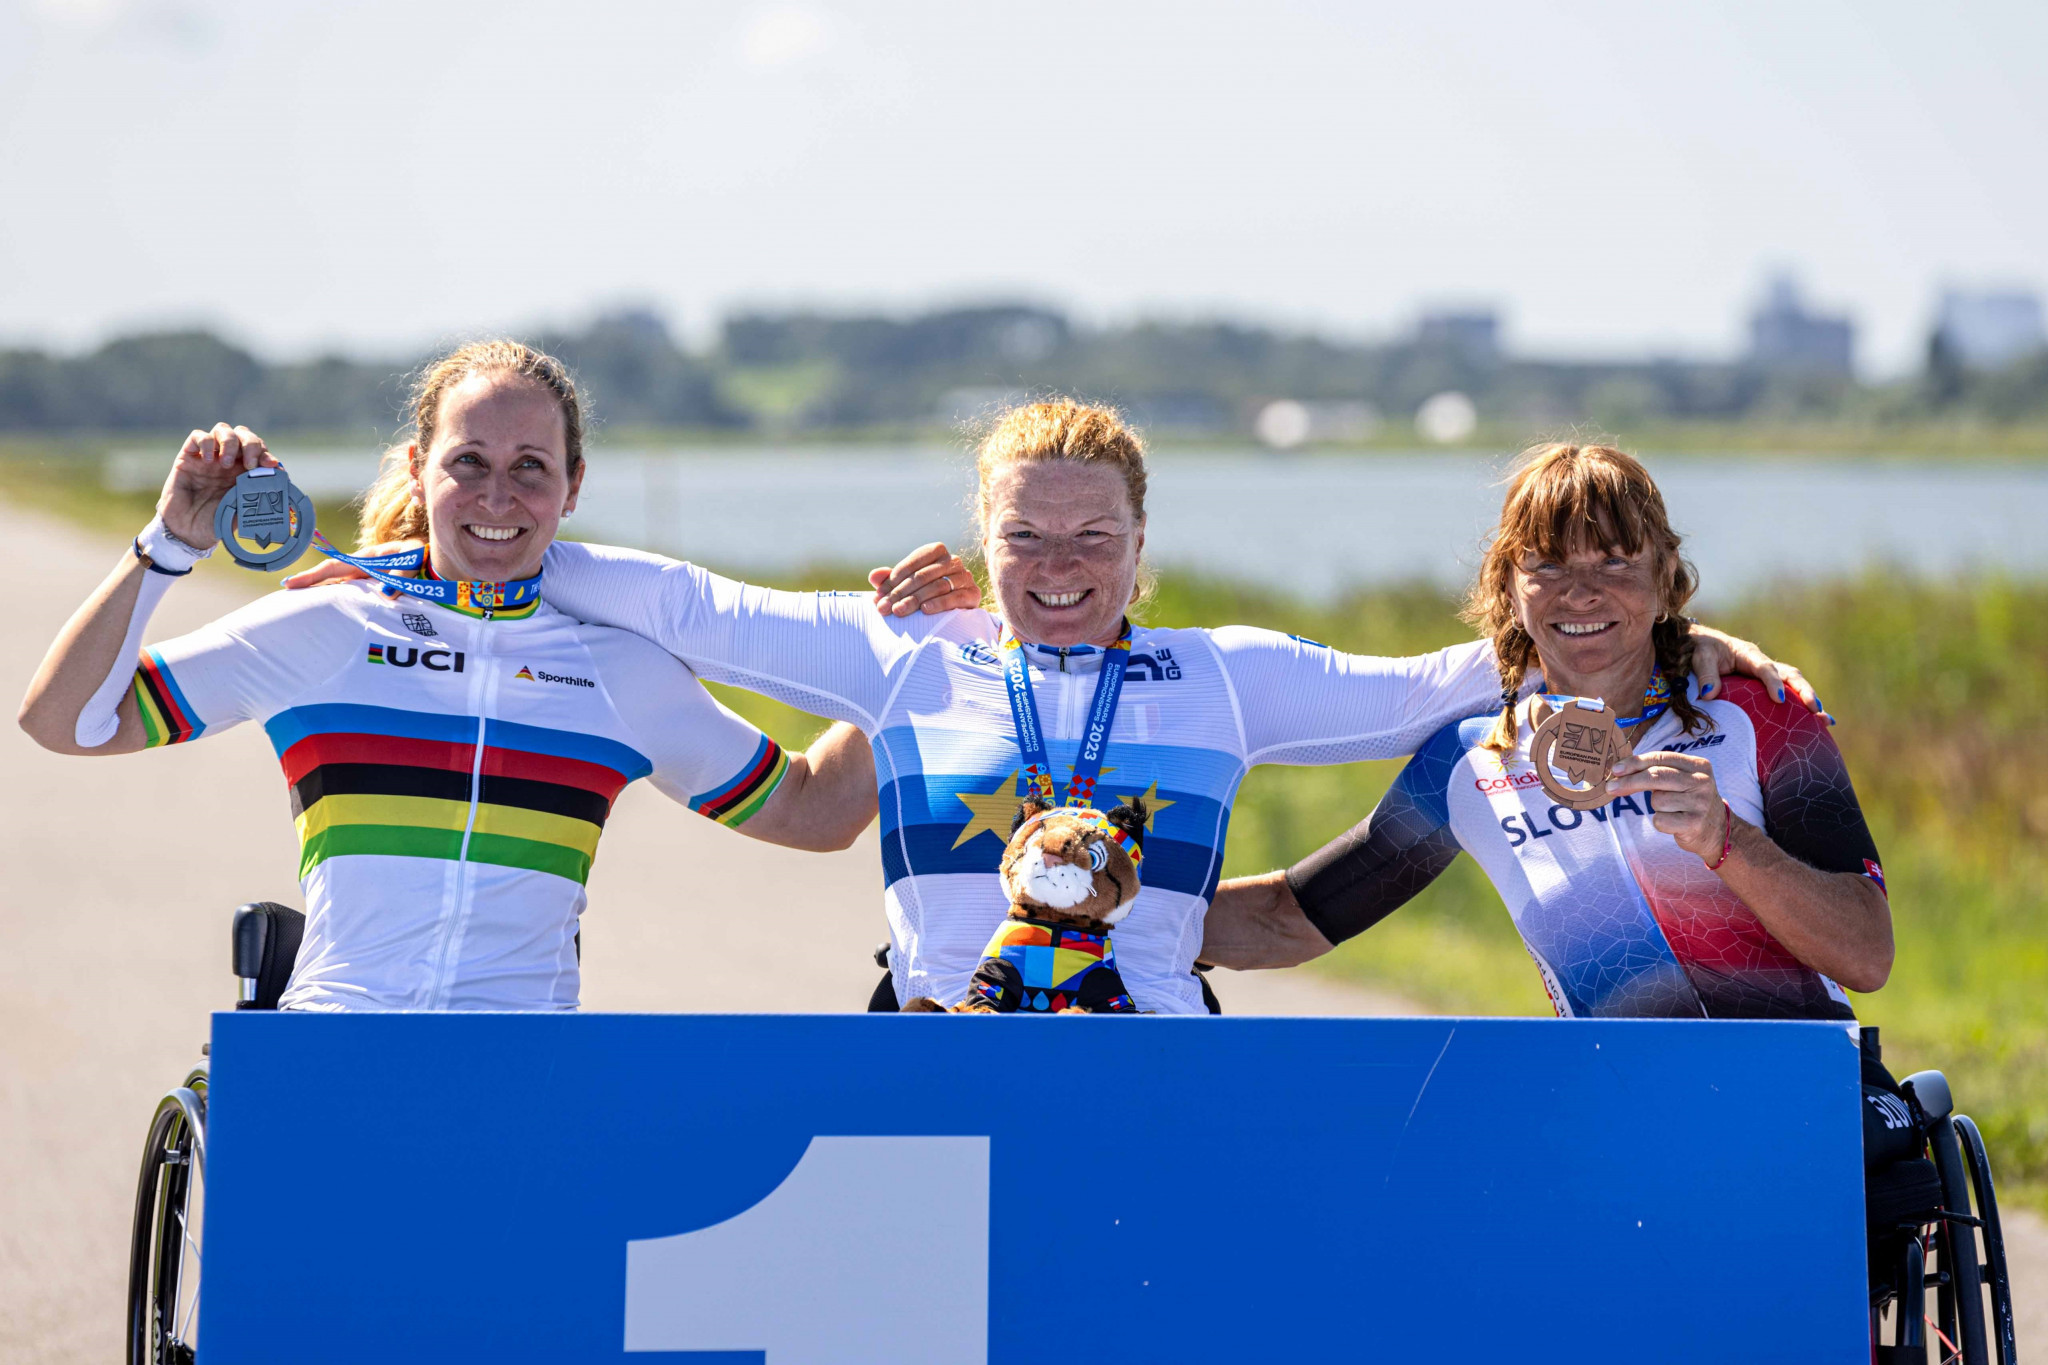 Italy's Double Paralympic cycling champion Francesca Porcellato, centre, captured the WH3 crown ©EPC